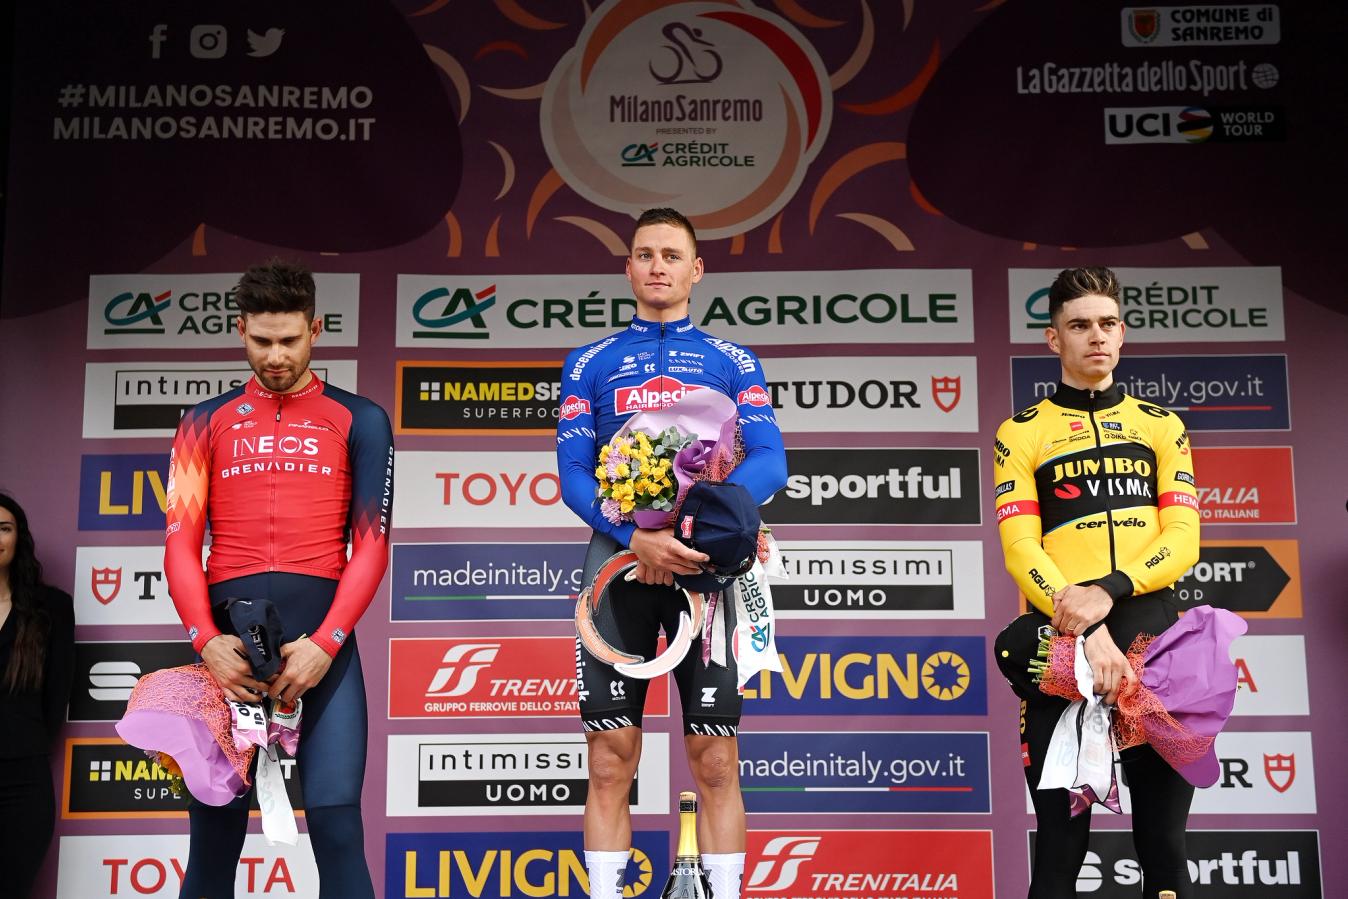 Van Aert was third in Milano San Remo after a four way battle on the Poggio